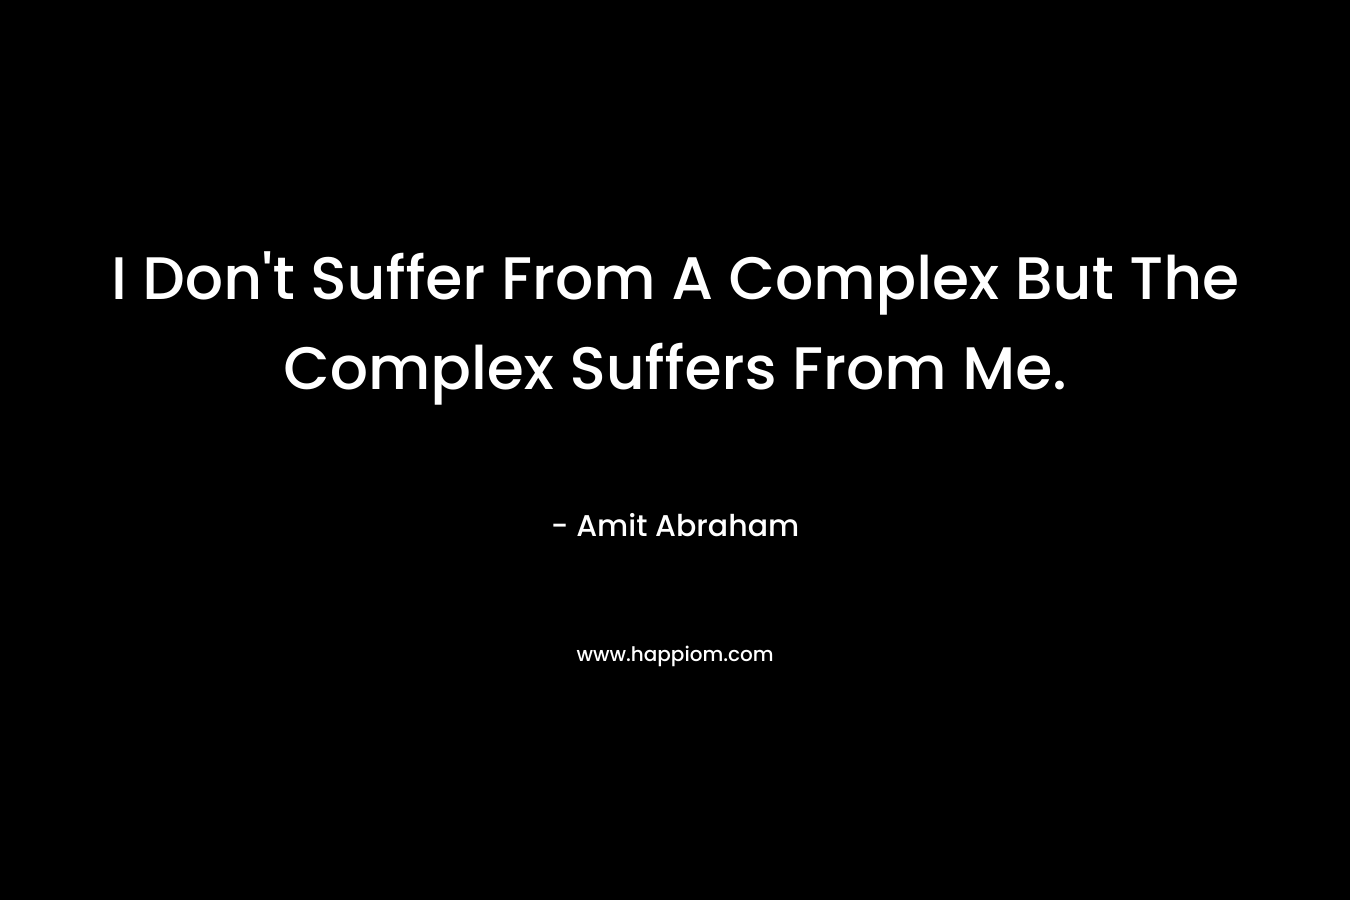 I Don't Suffer From A Complex But The Complex Suffers From Me.